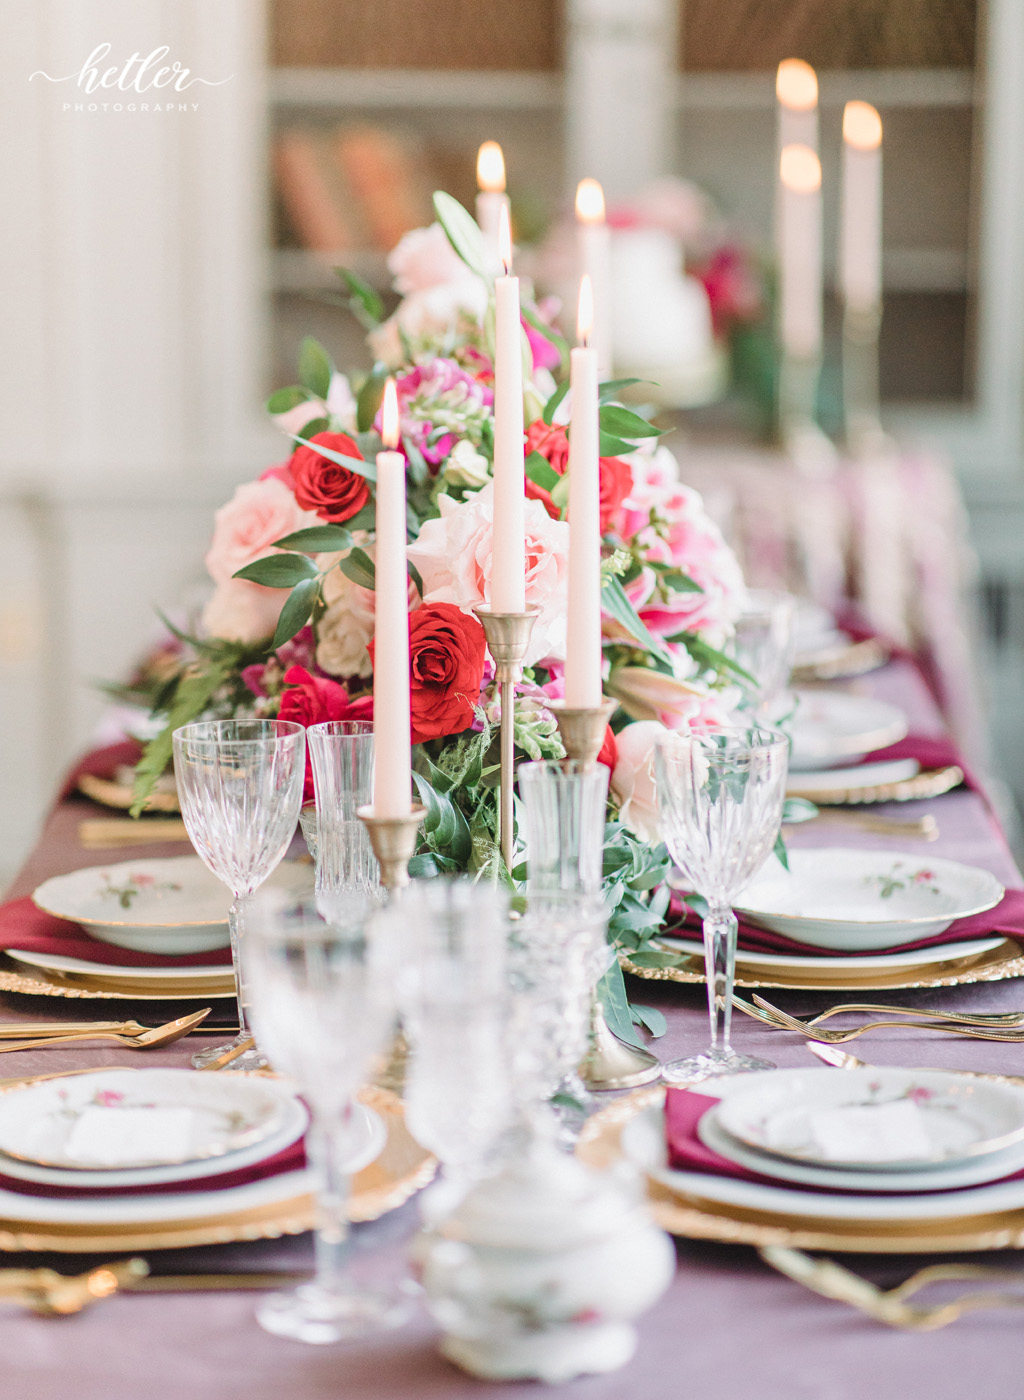 The Lit GR wedding with romantic Valentine's Day inspiration